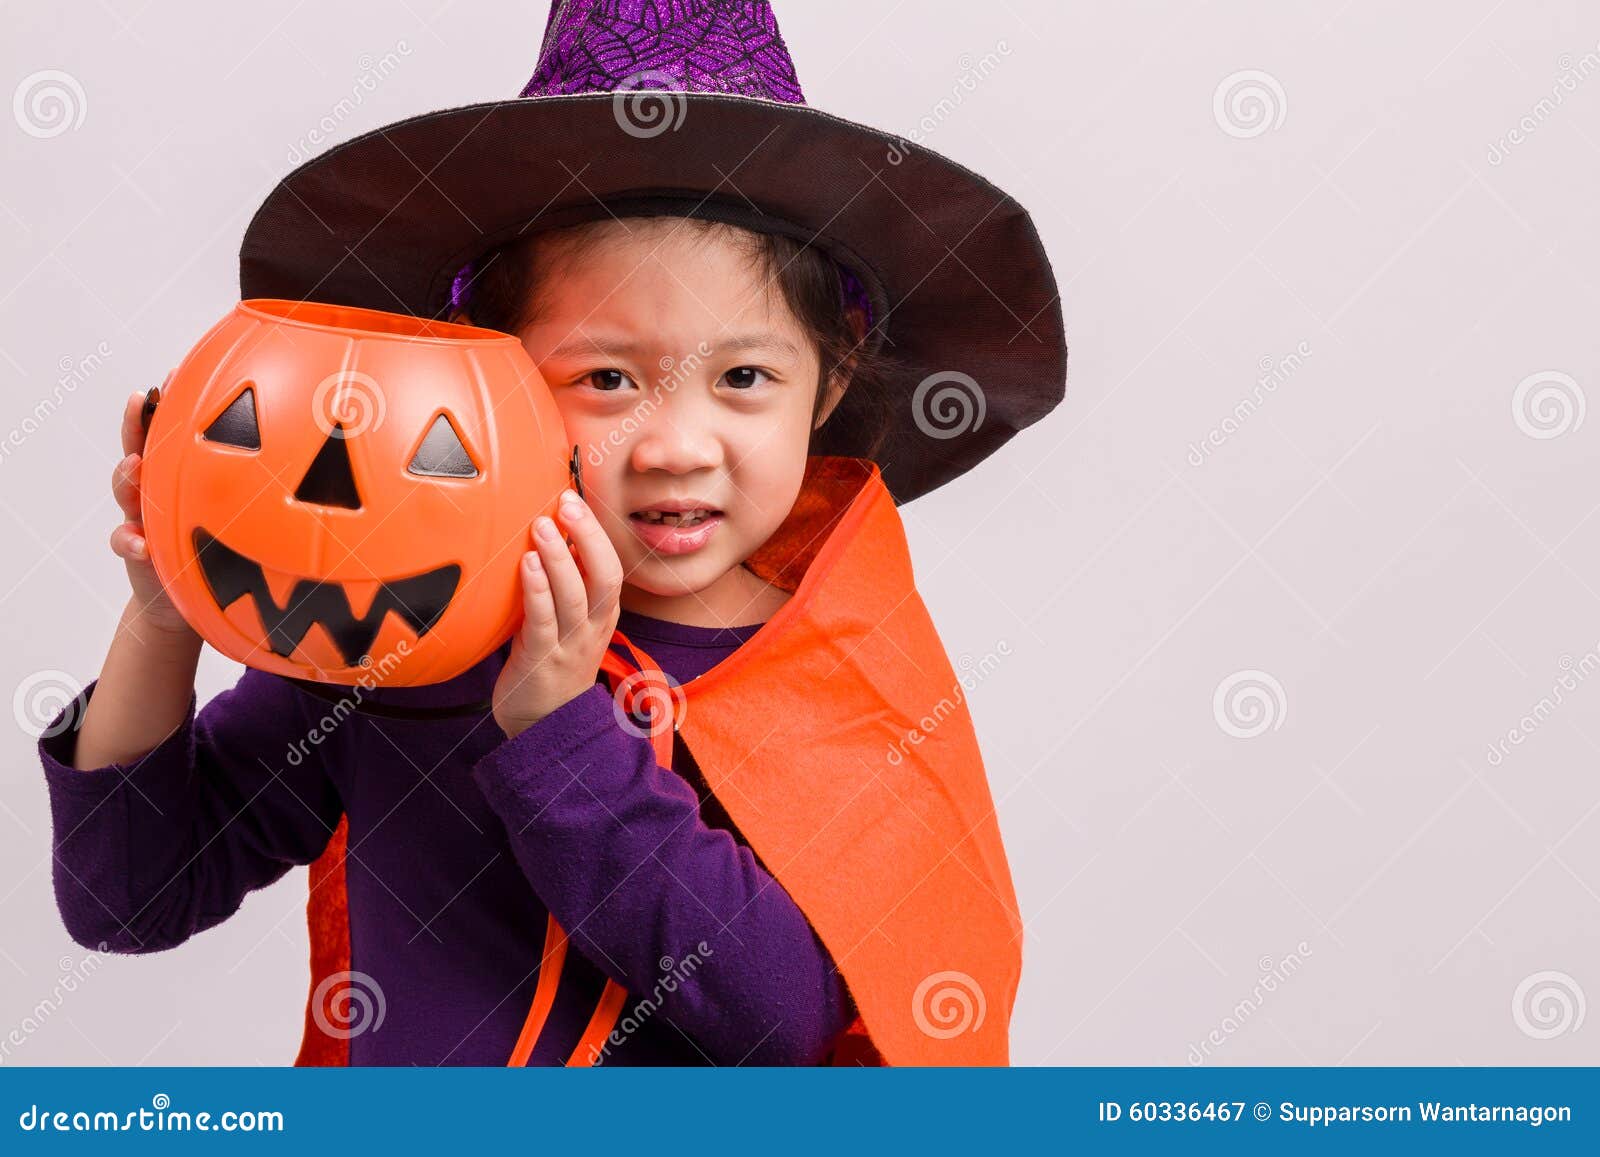 Child in Witch Costume on White / Child in Witch Costume Stock Image ...